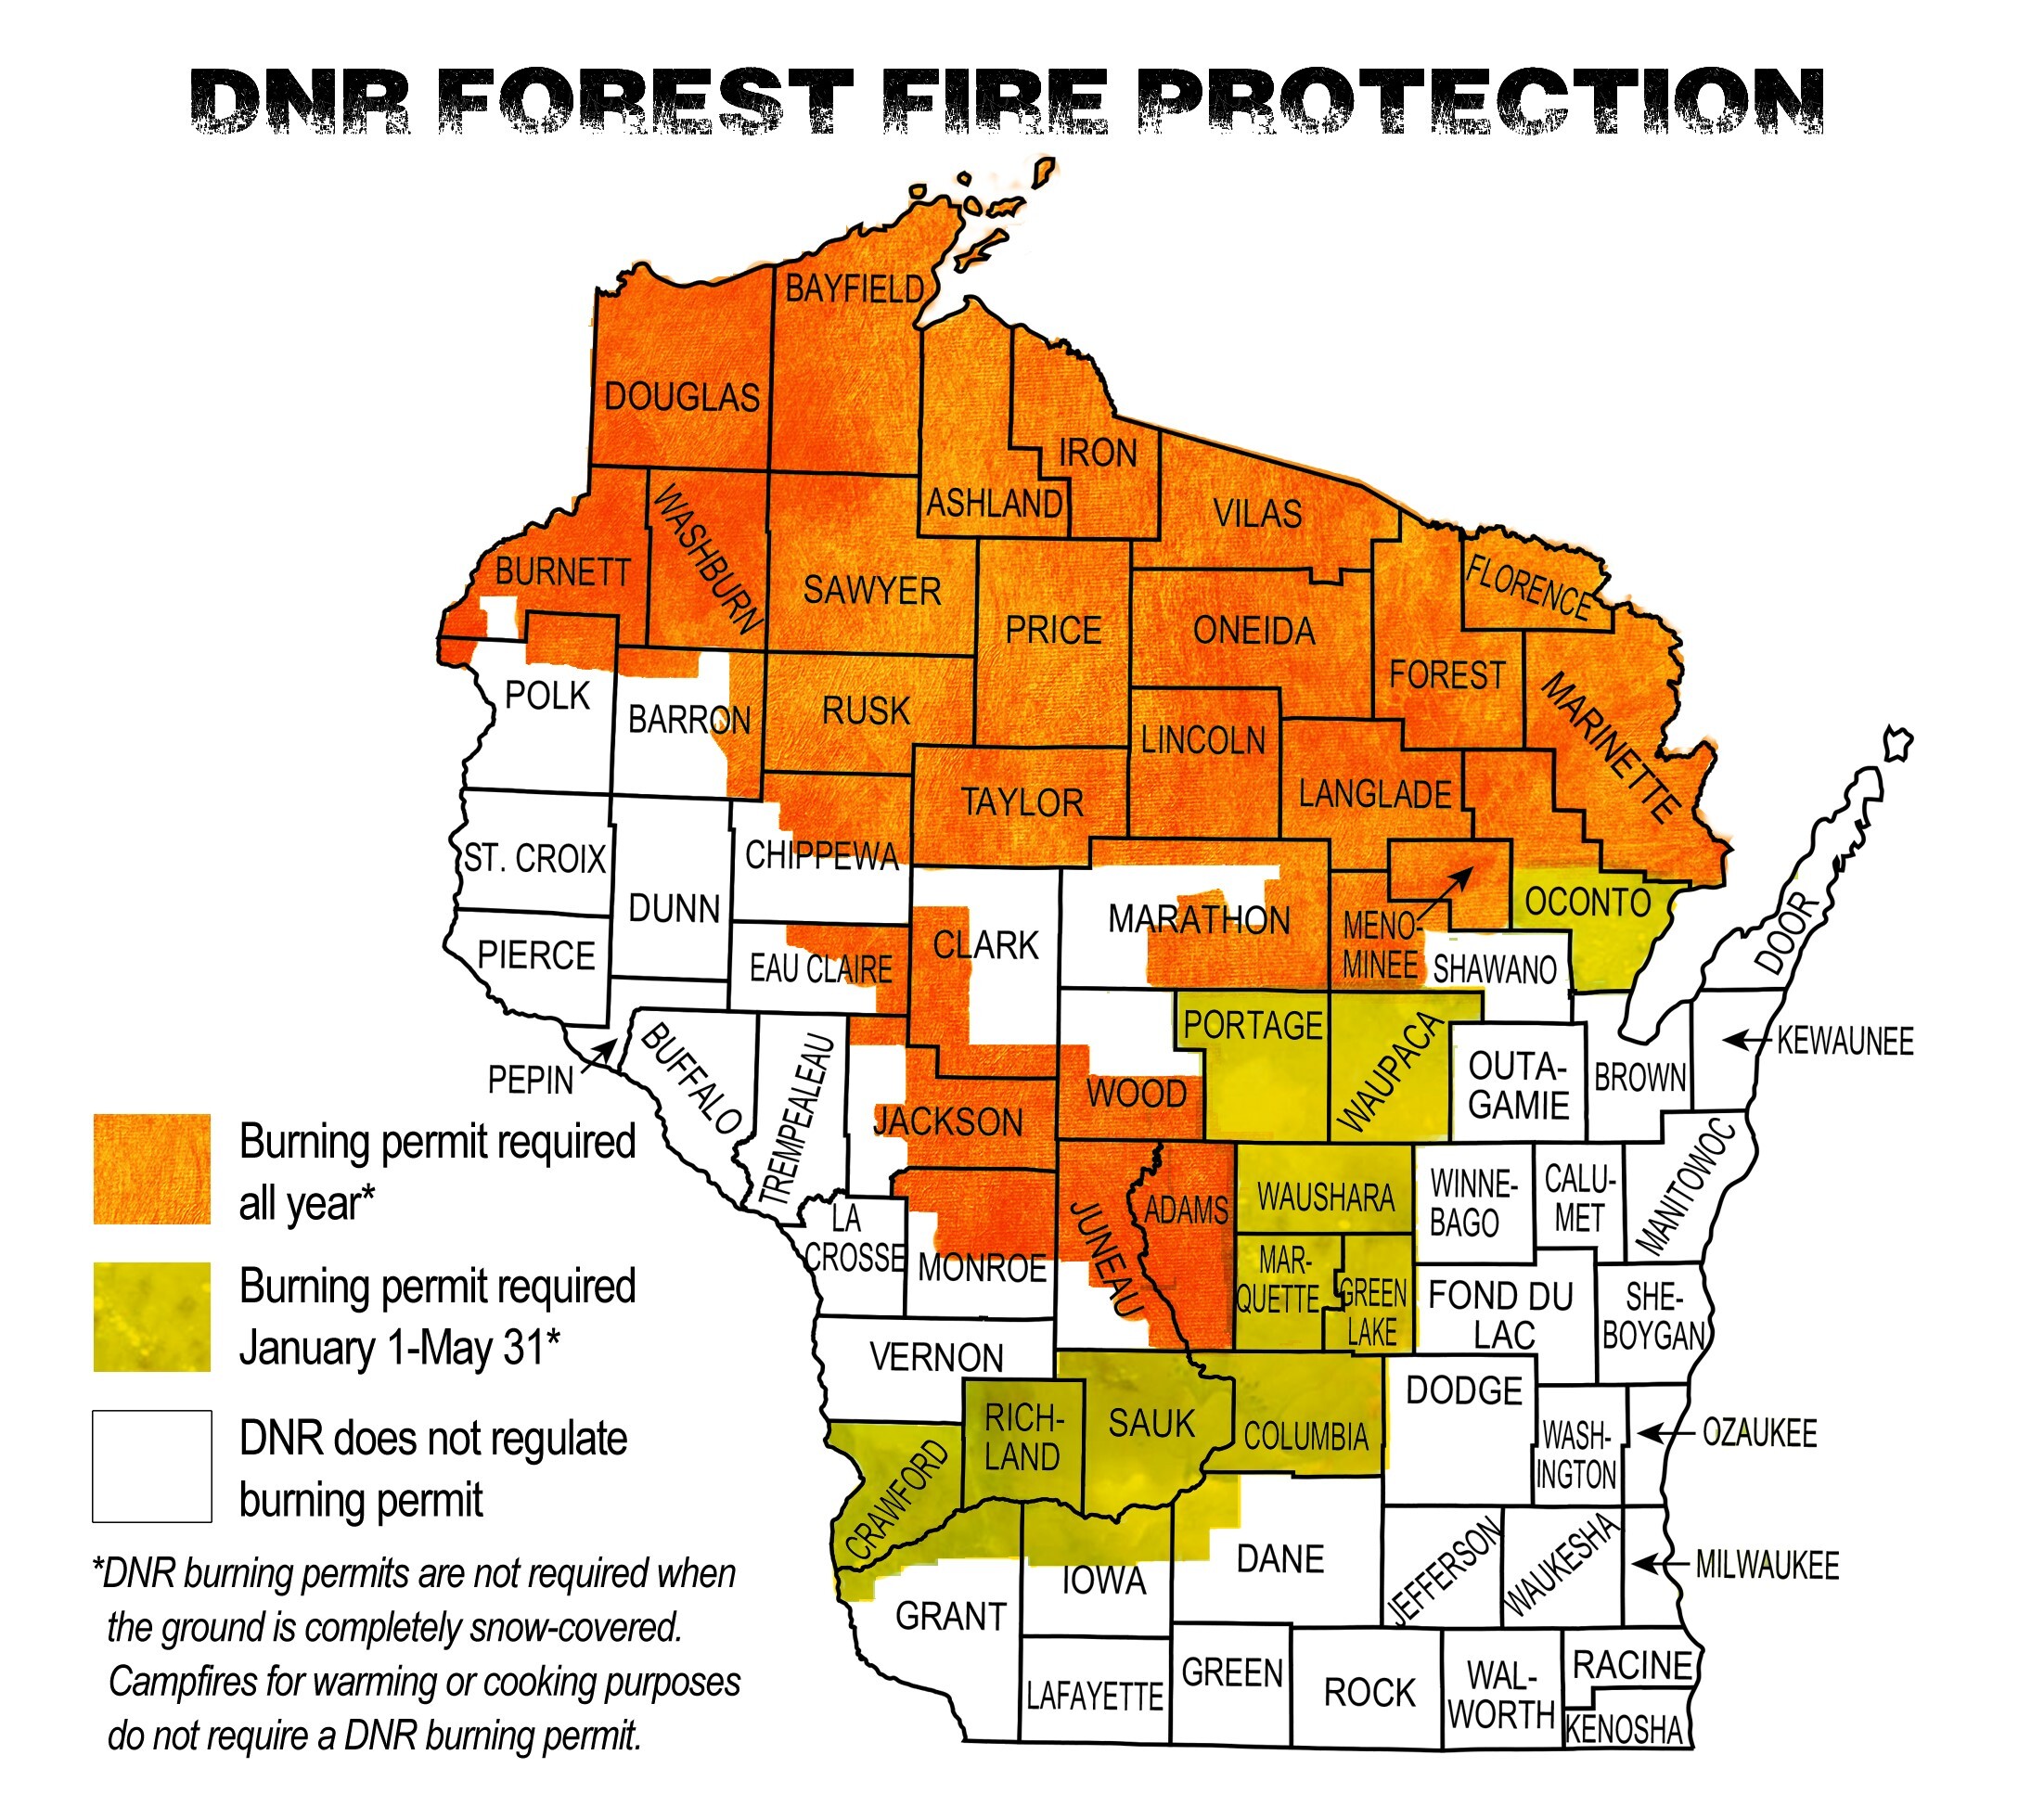 DNR Forest Fire Protection Map.